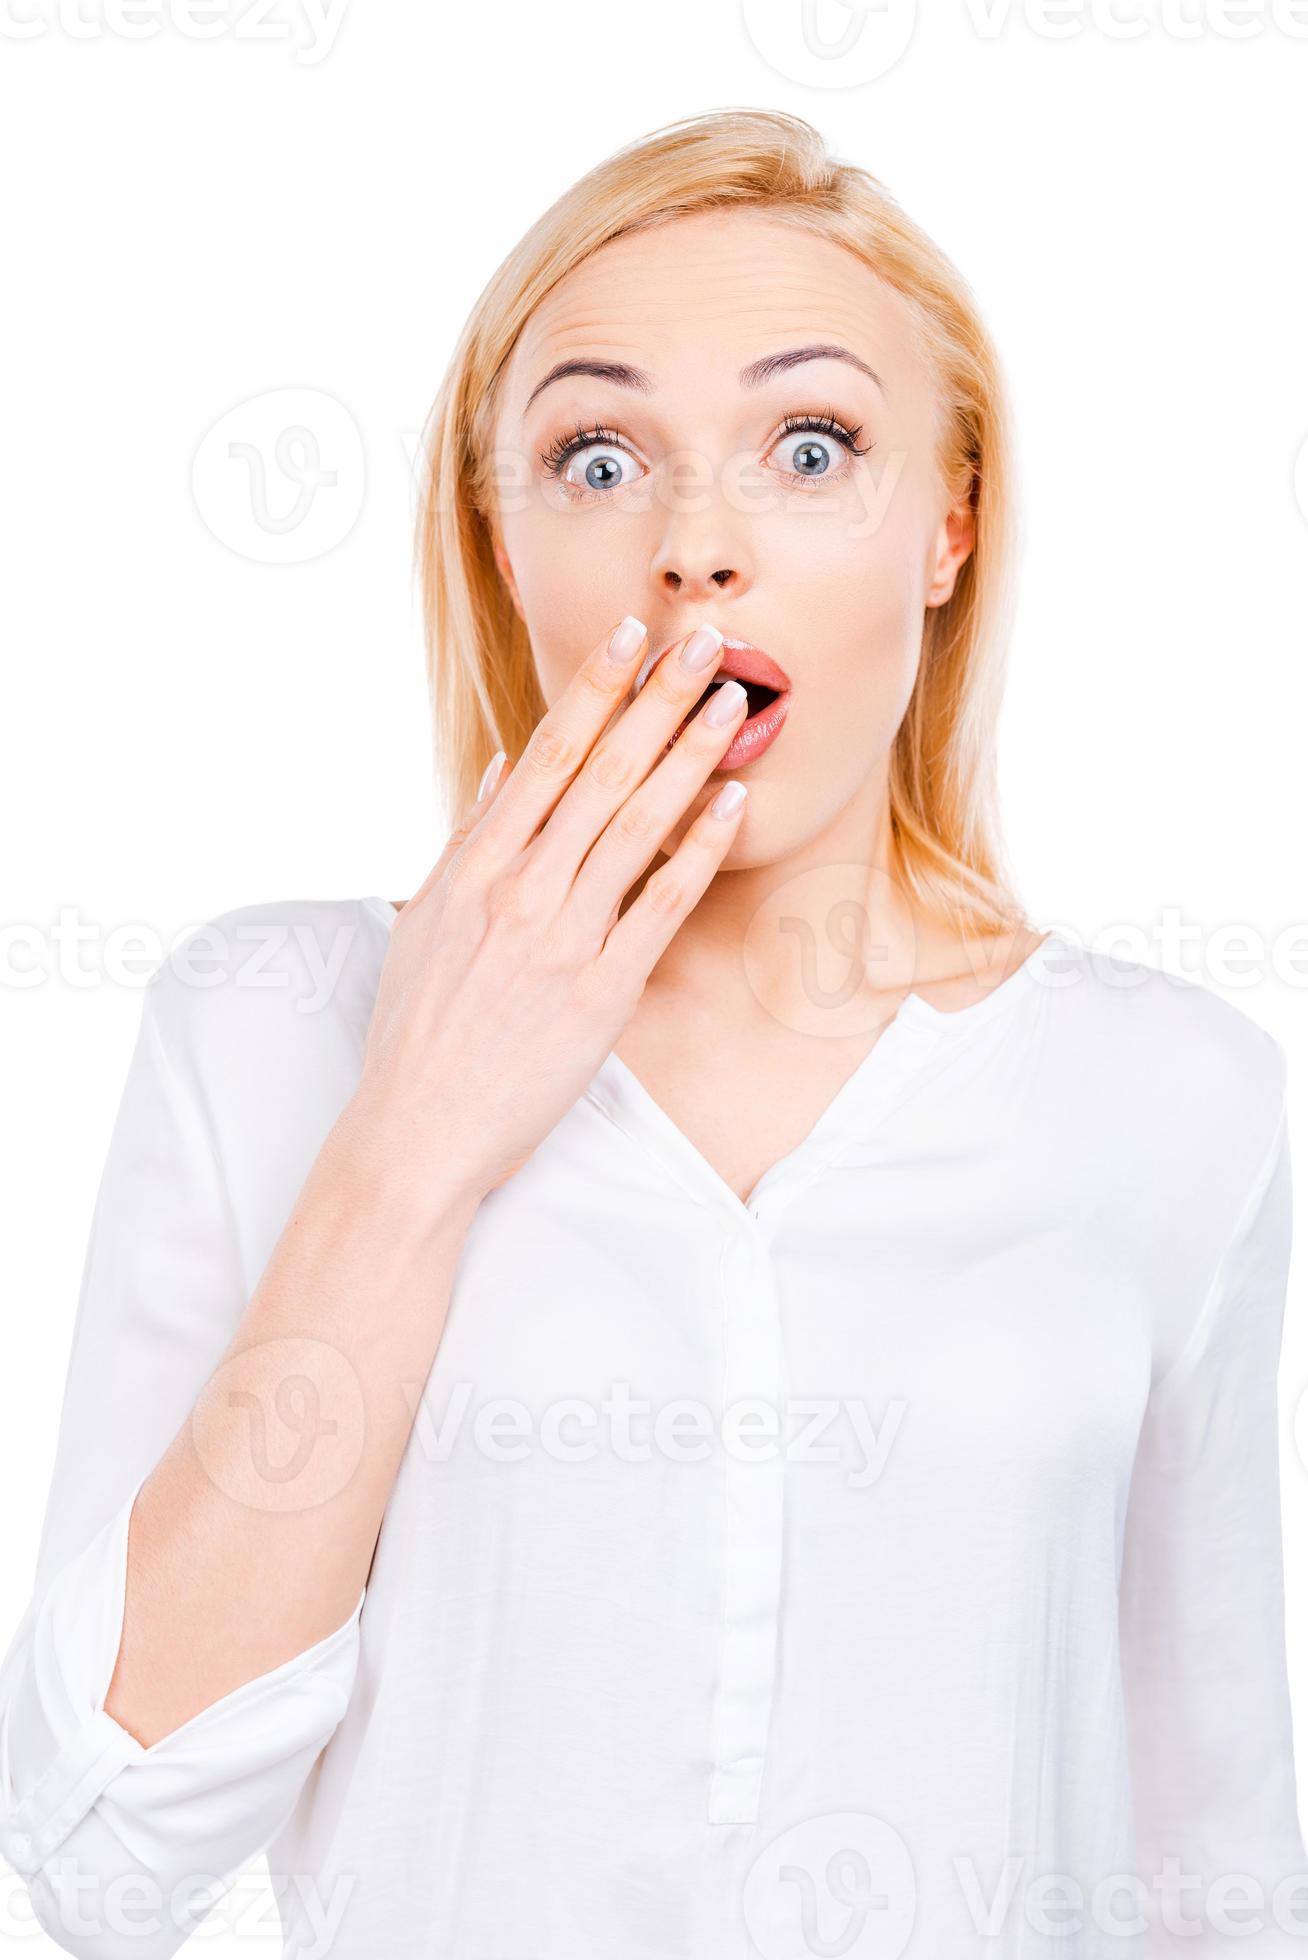 Shocking News Surprised Calm Woman Covers Her Mouth Close Isolated